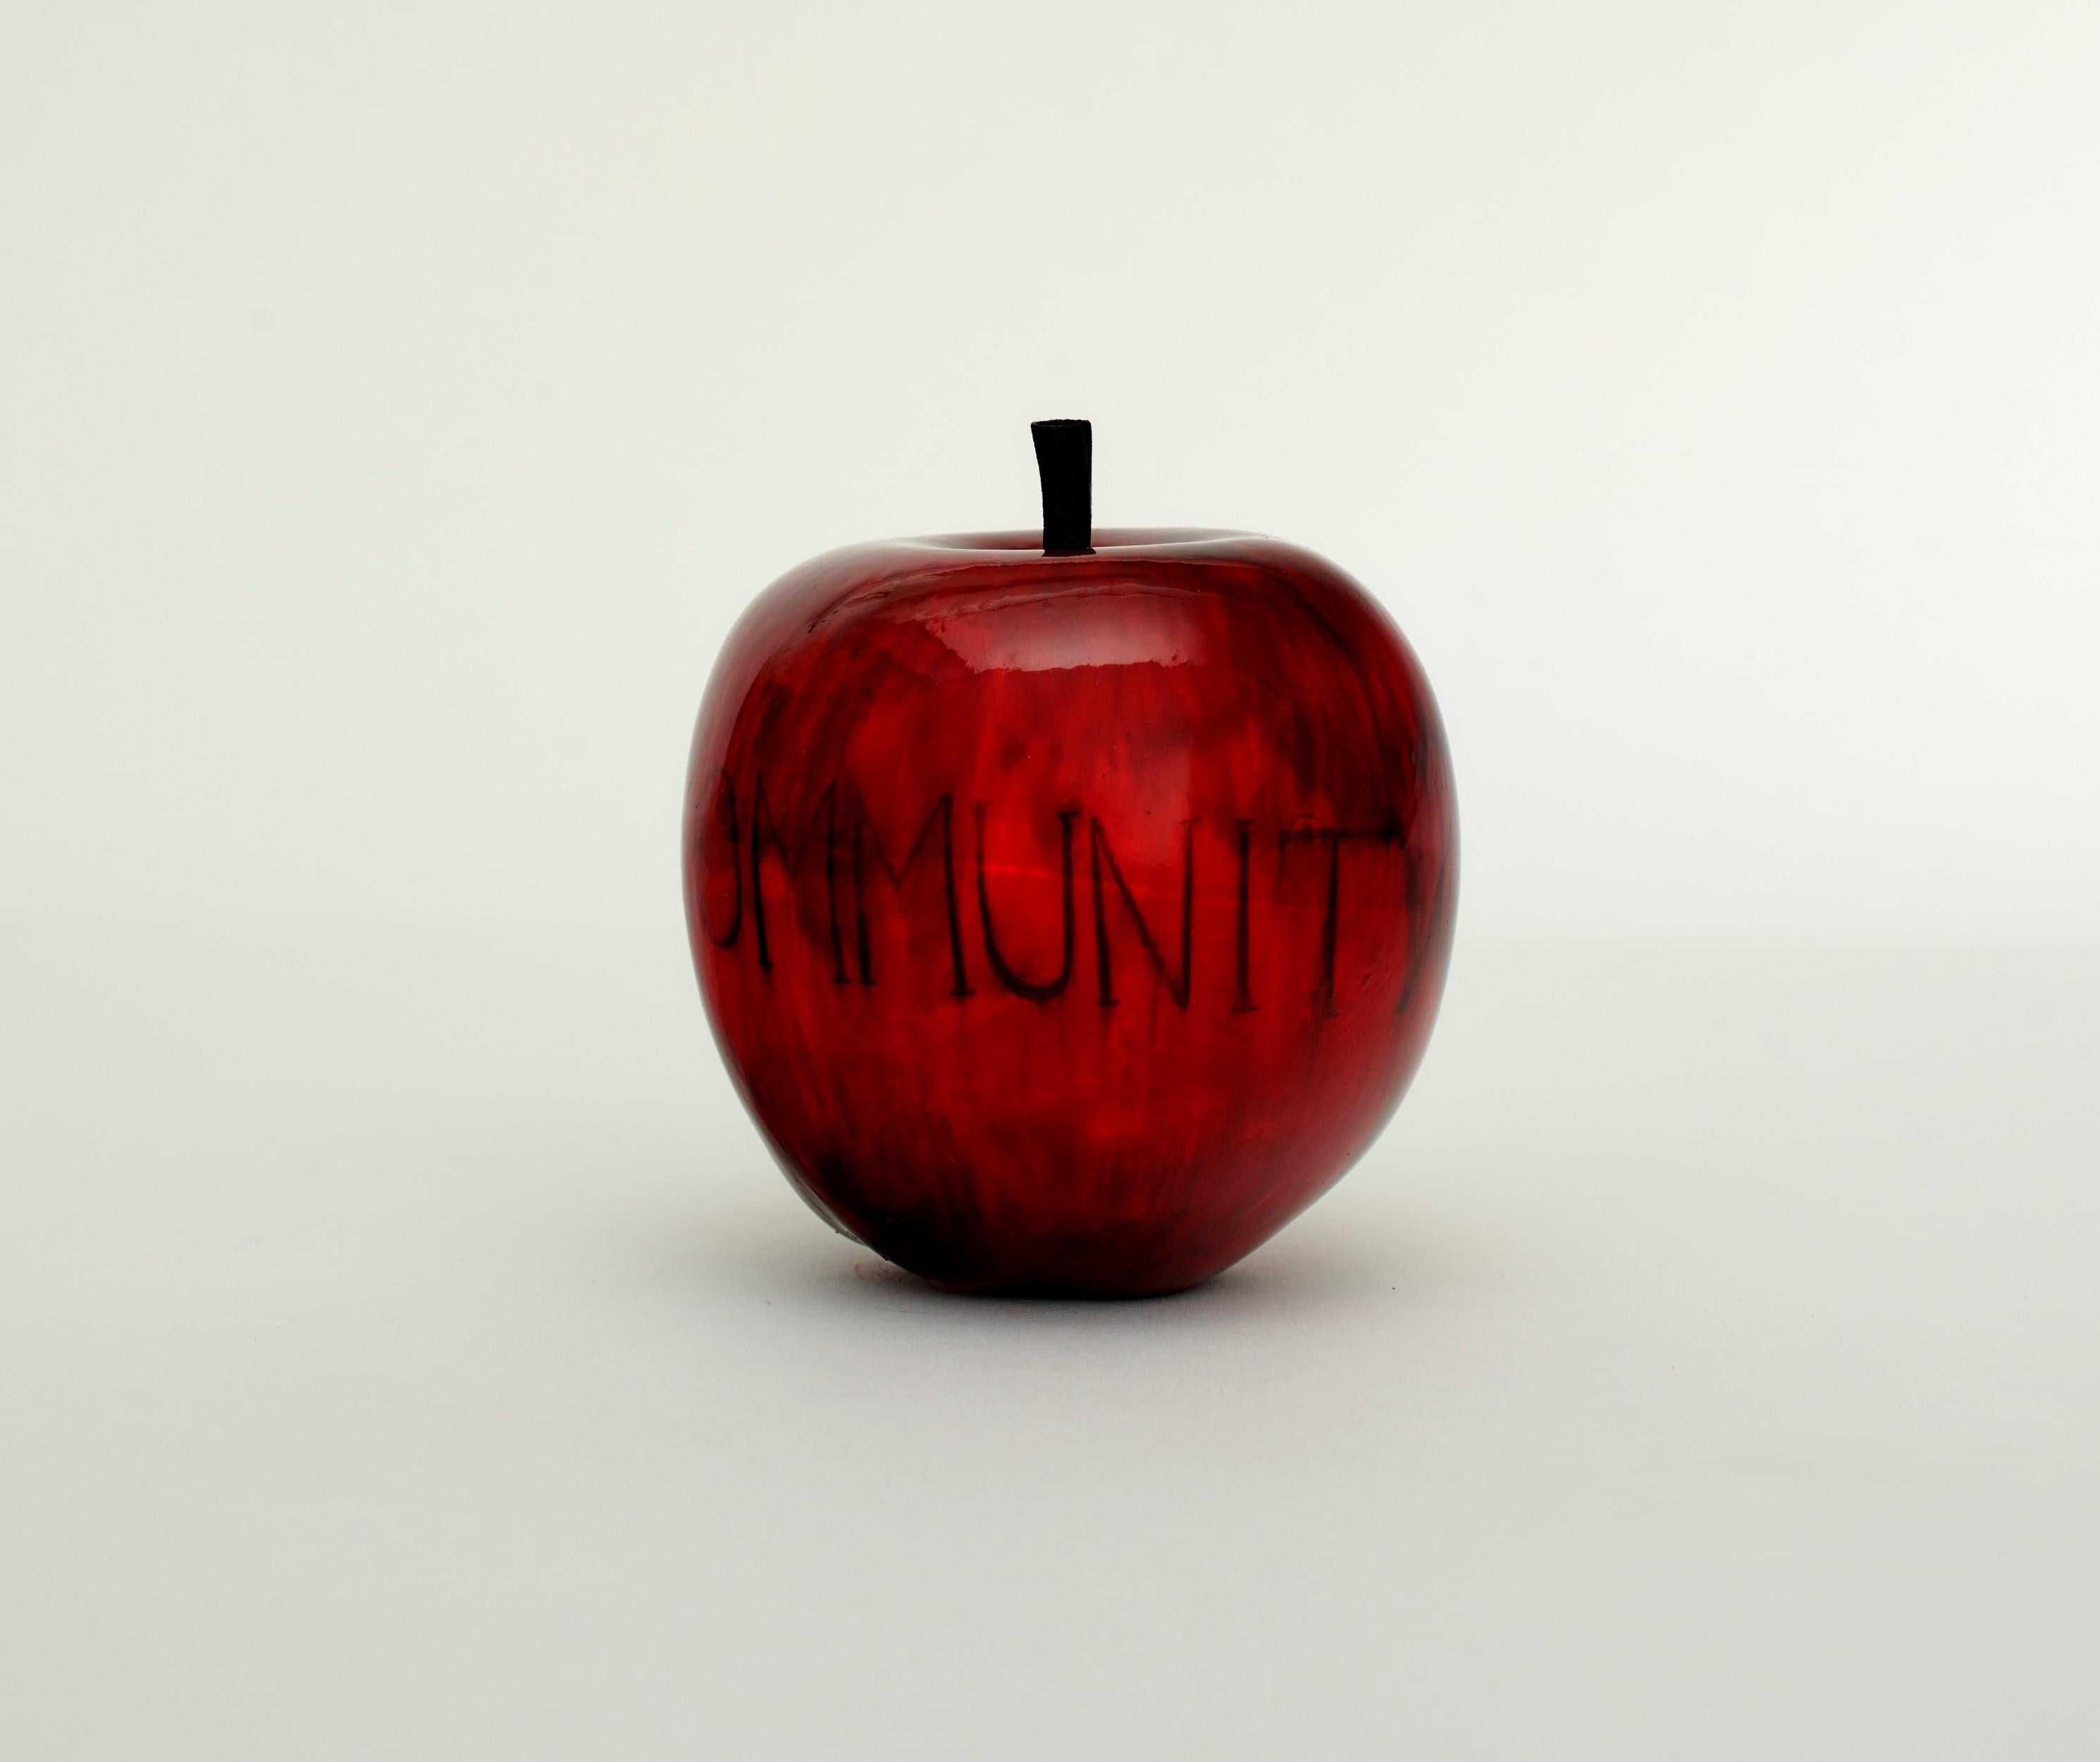 Community (Apple) - Sculpture by Barnaby Barford